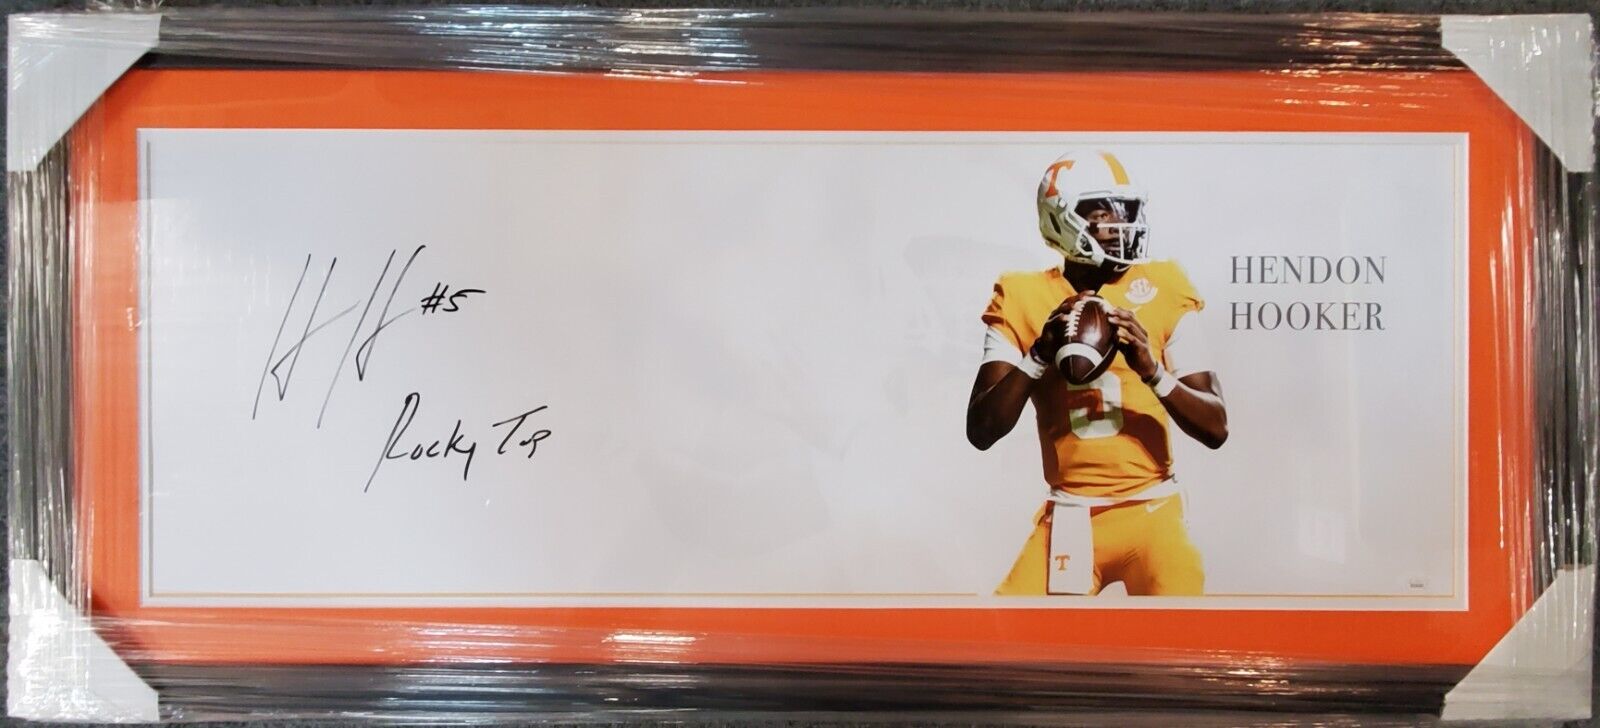 MVP Authentics Tennessee Volunteers Hendon Hooker Framed Signed 42X18 Panoramic Photo Jsa Coa 405 sports jersey framing , jersey framing